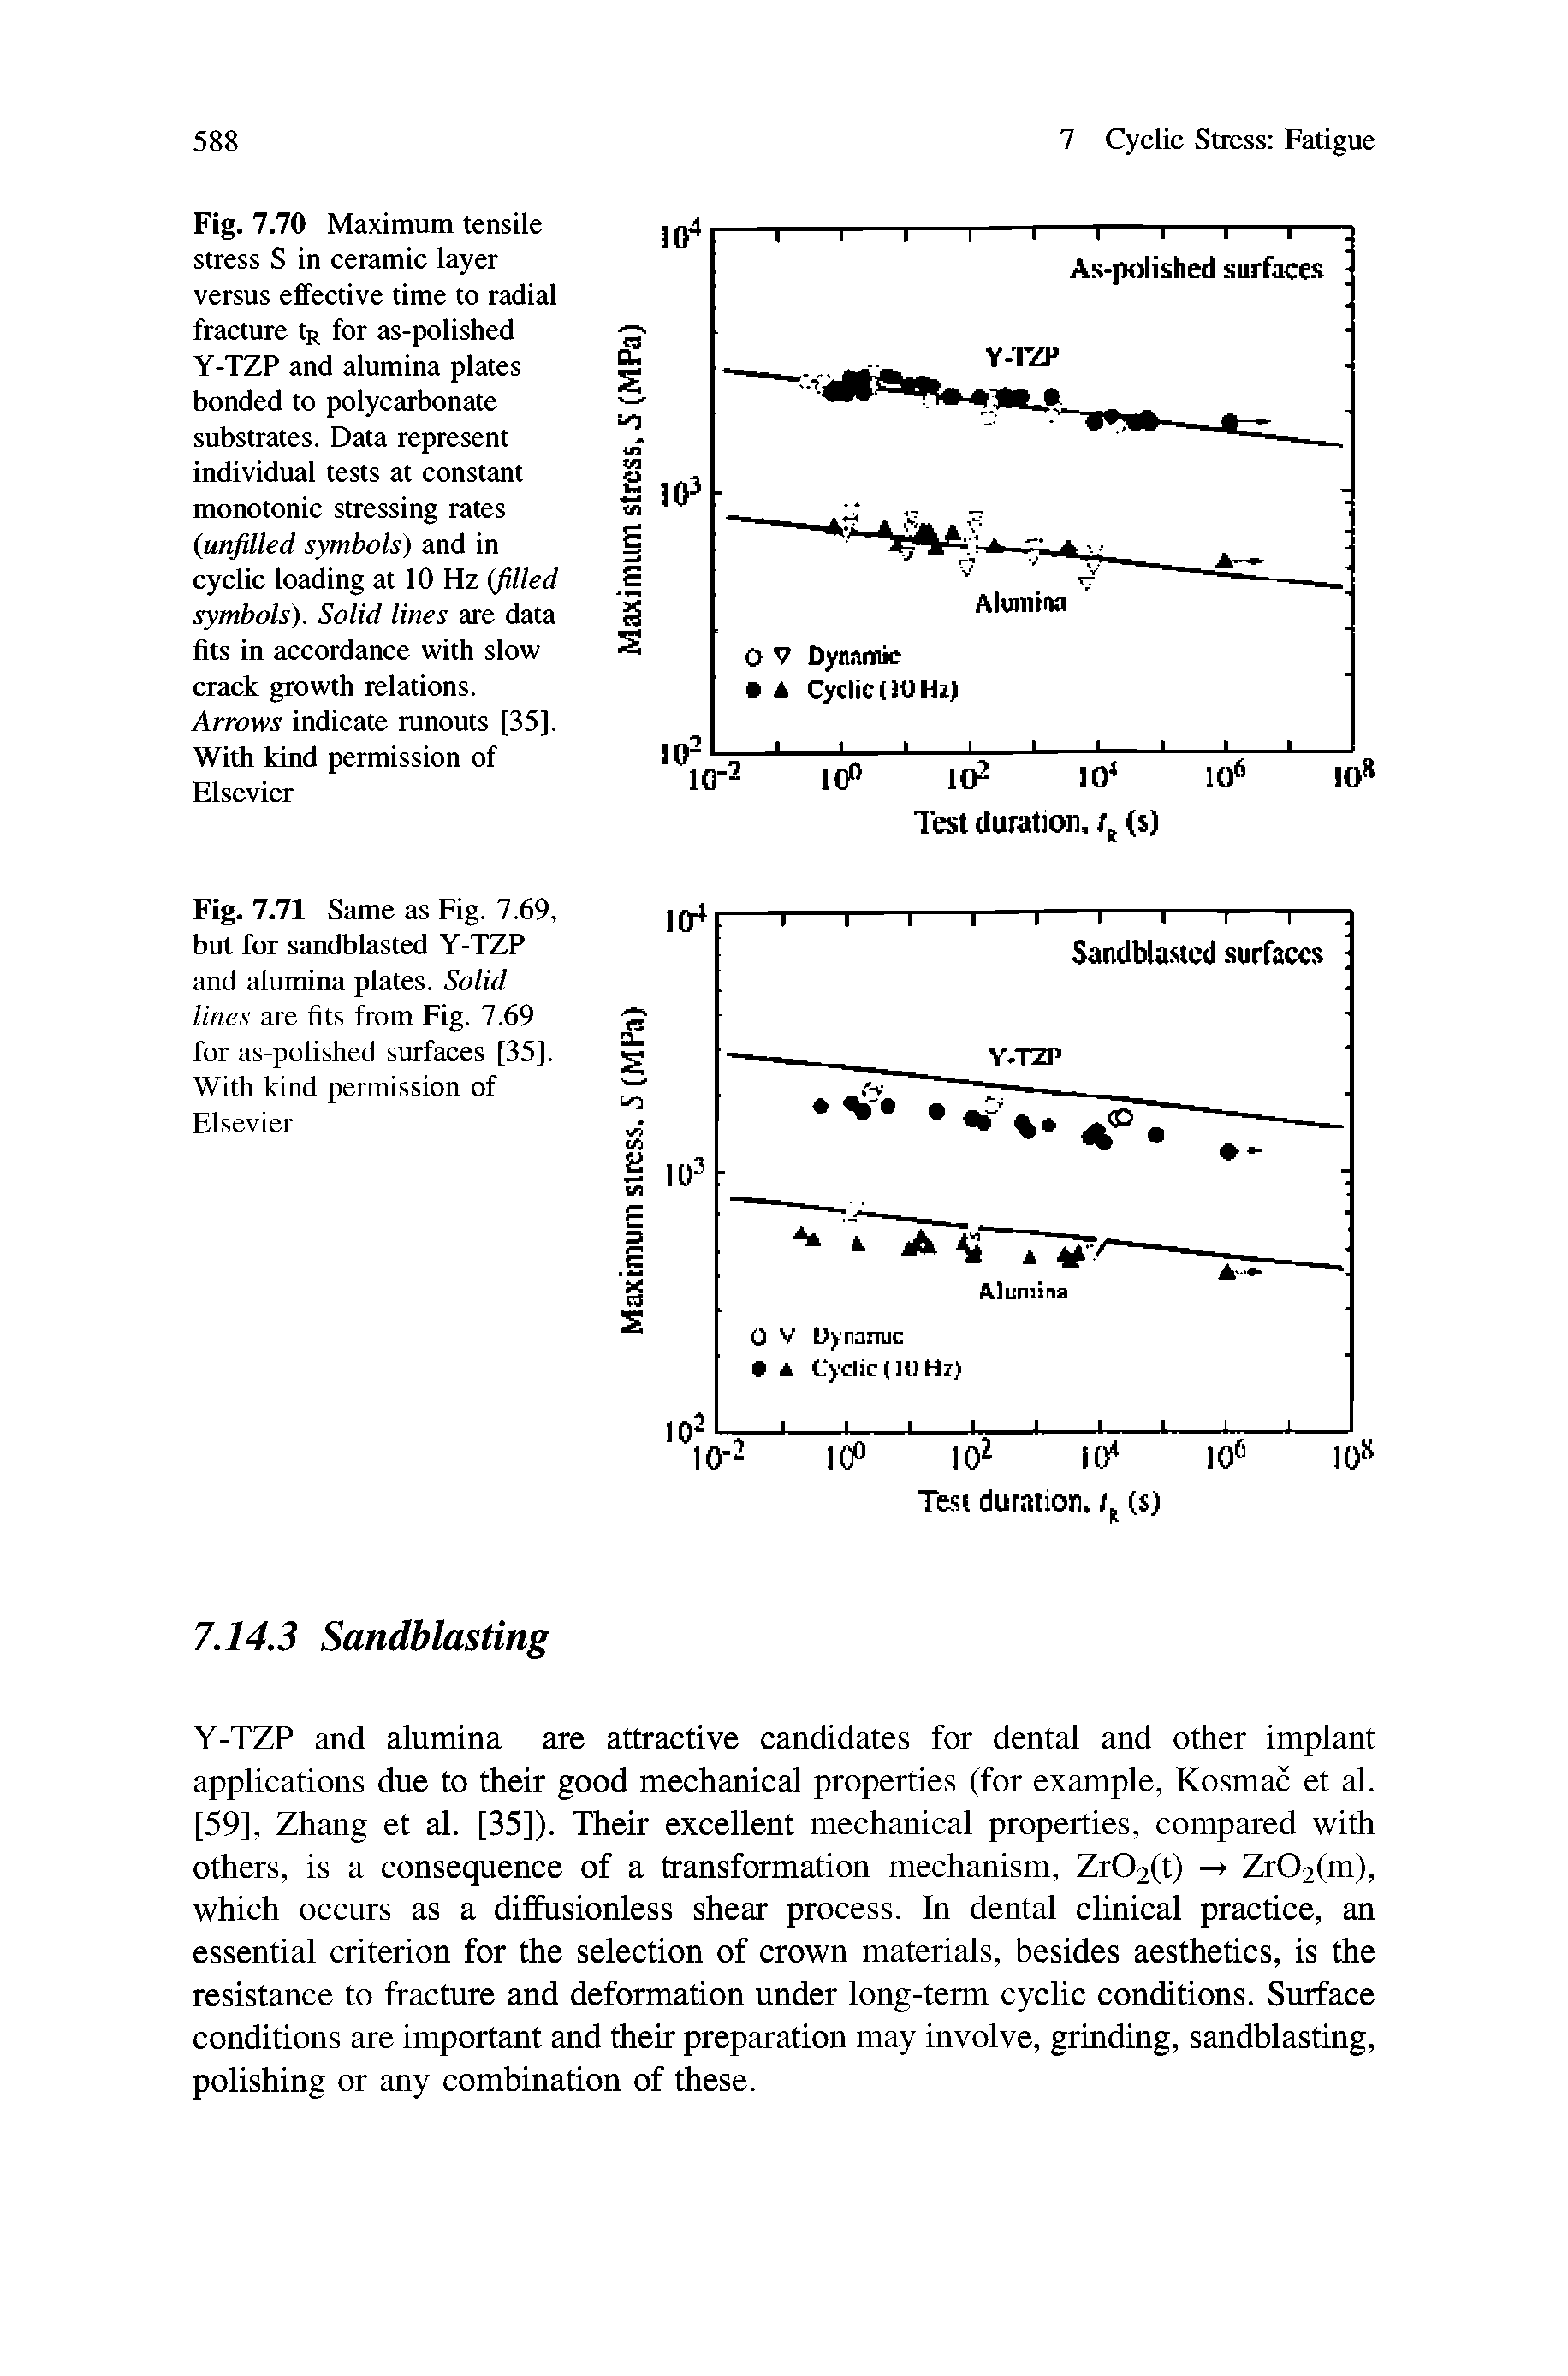 Fig. 7.70 Maximum tensile stress S in ceramic layer versus effective time to radial fracture tR for as-polished Y-TZP and alumina plates bonded to polycarbonate substrates. Data represent individual tests at constant monotonic stressing rates (unfilled symbols) and in cyclic loading at 10 Hz (filled symbols). Solid lines are data fits in accordance with slow crack growth relations. Arrows indicate runouts [35]. With kind permission of Elsevier...